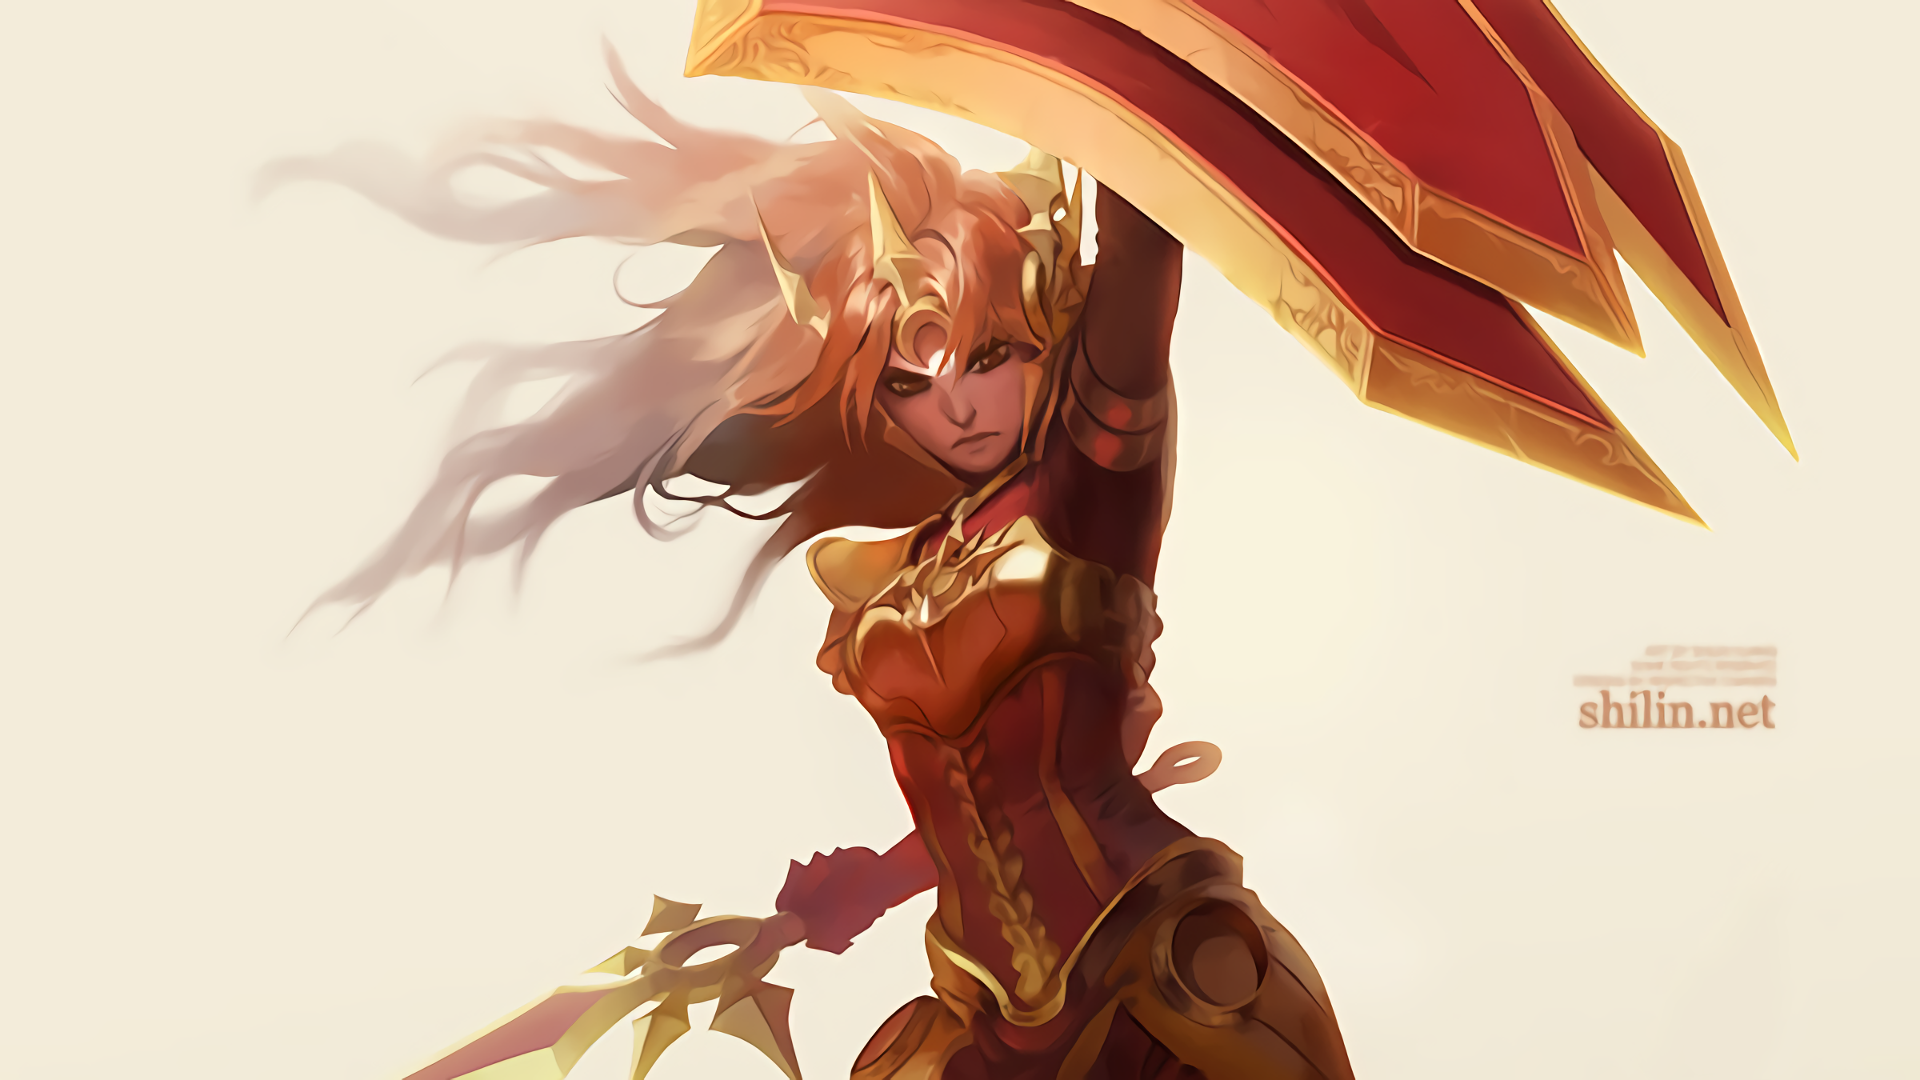 The Shield Is The Mightiest by Shilin